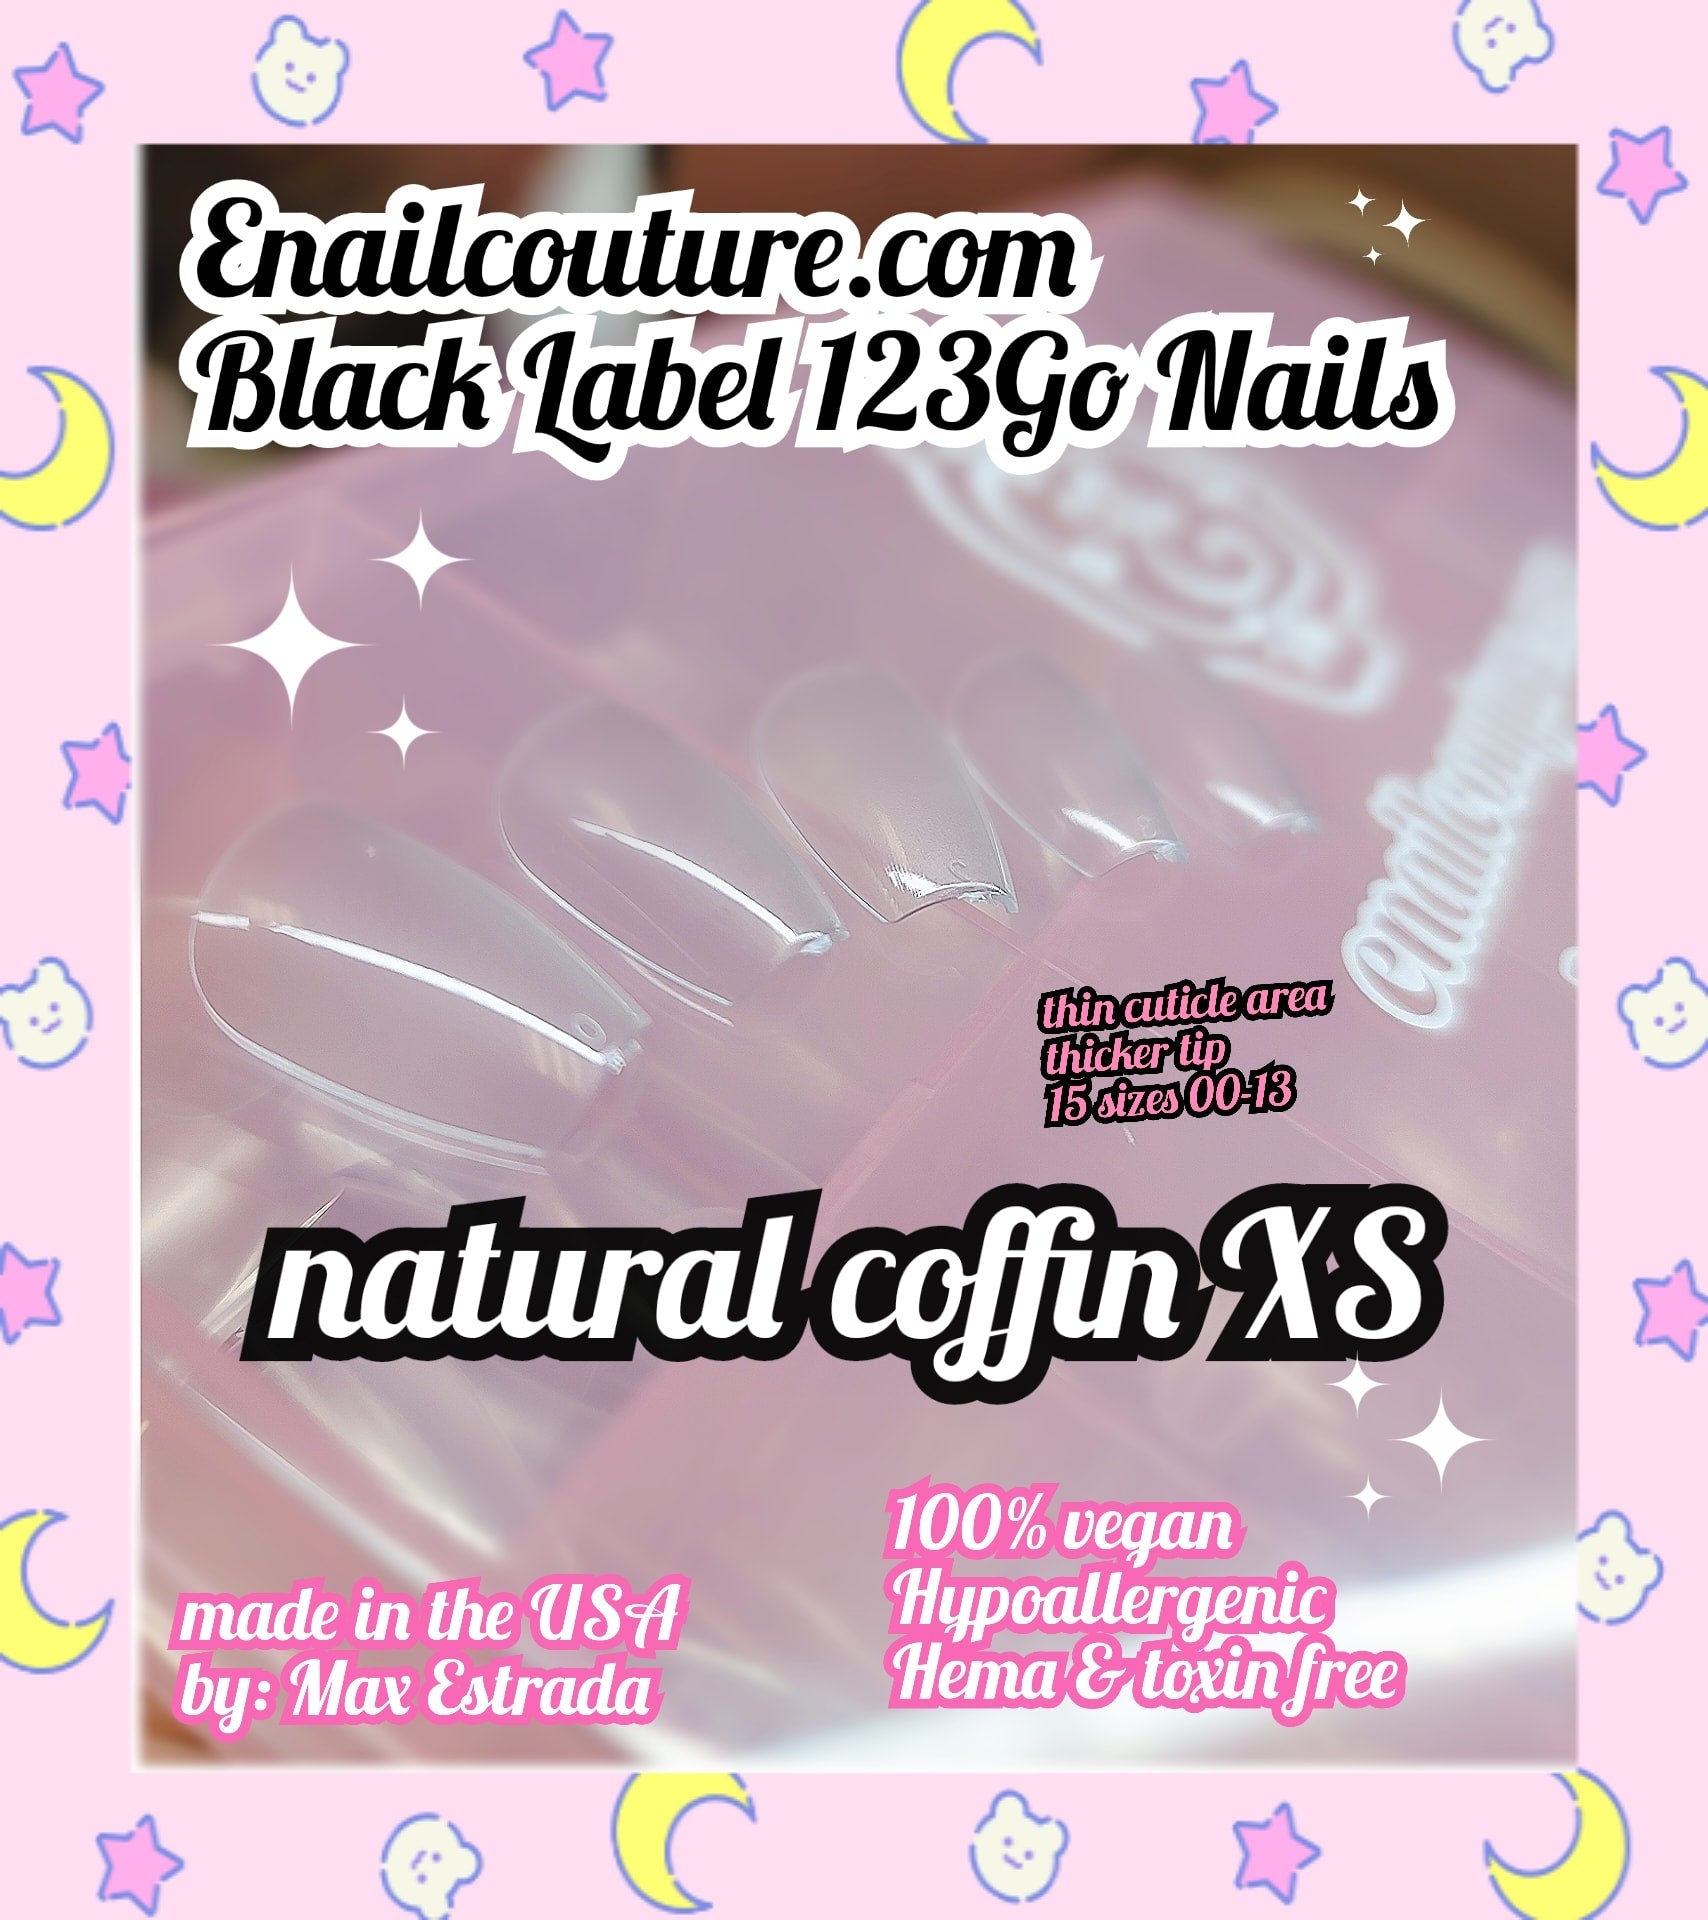 123go Black Label Nails natural coffin XS (Soft Gel Nail Tips- Clear Cover Full Nail Extensions - Pre-shaped Acrylic False Gelly Nail Tips 15 Sizes for DIY Salon Nail Extensions)